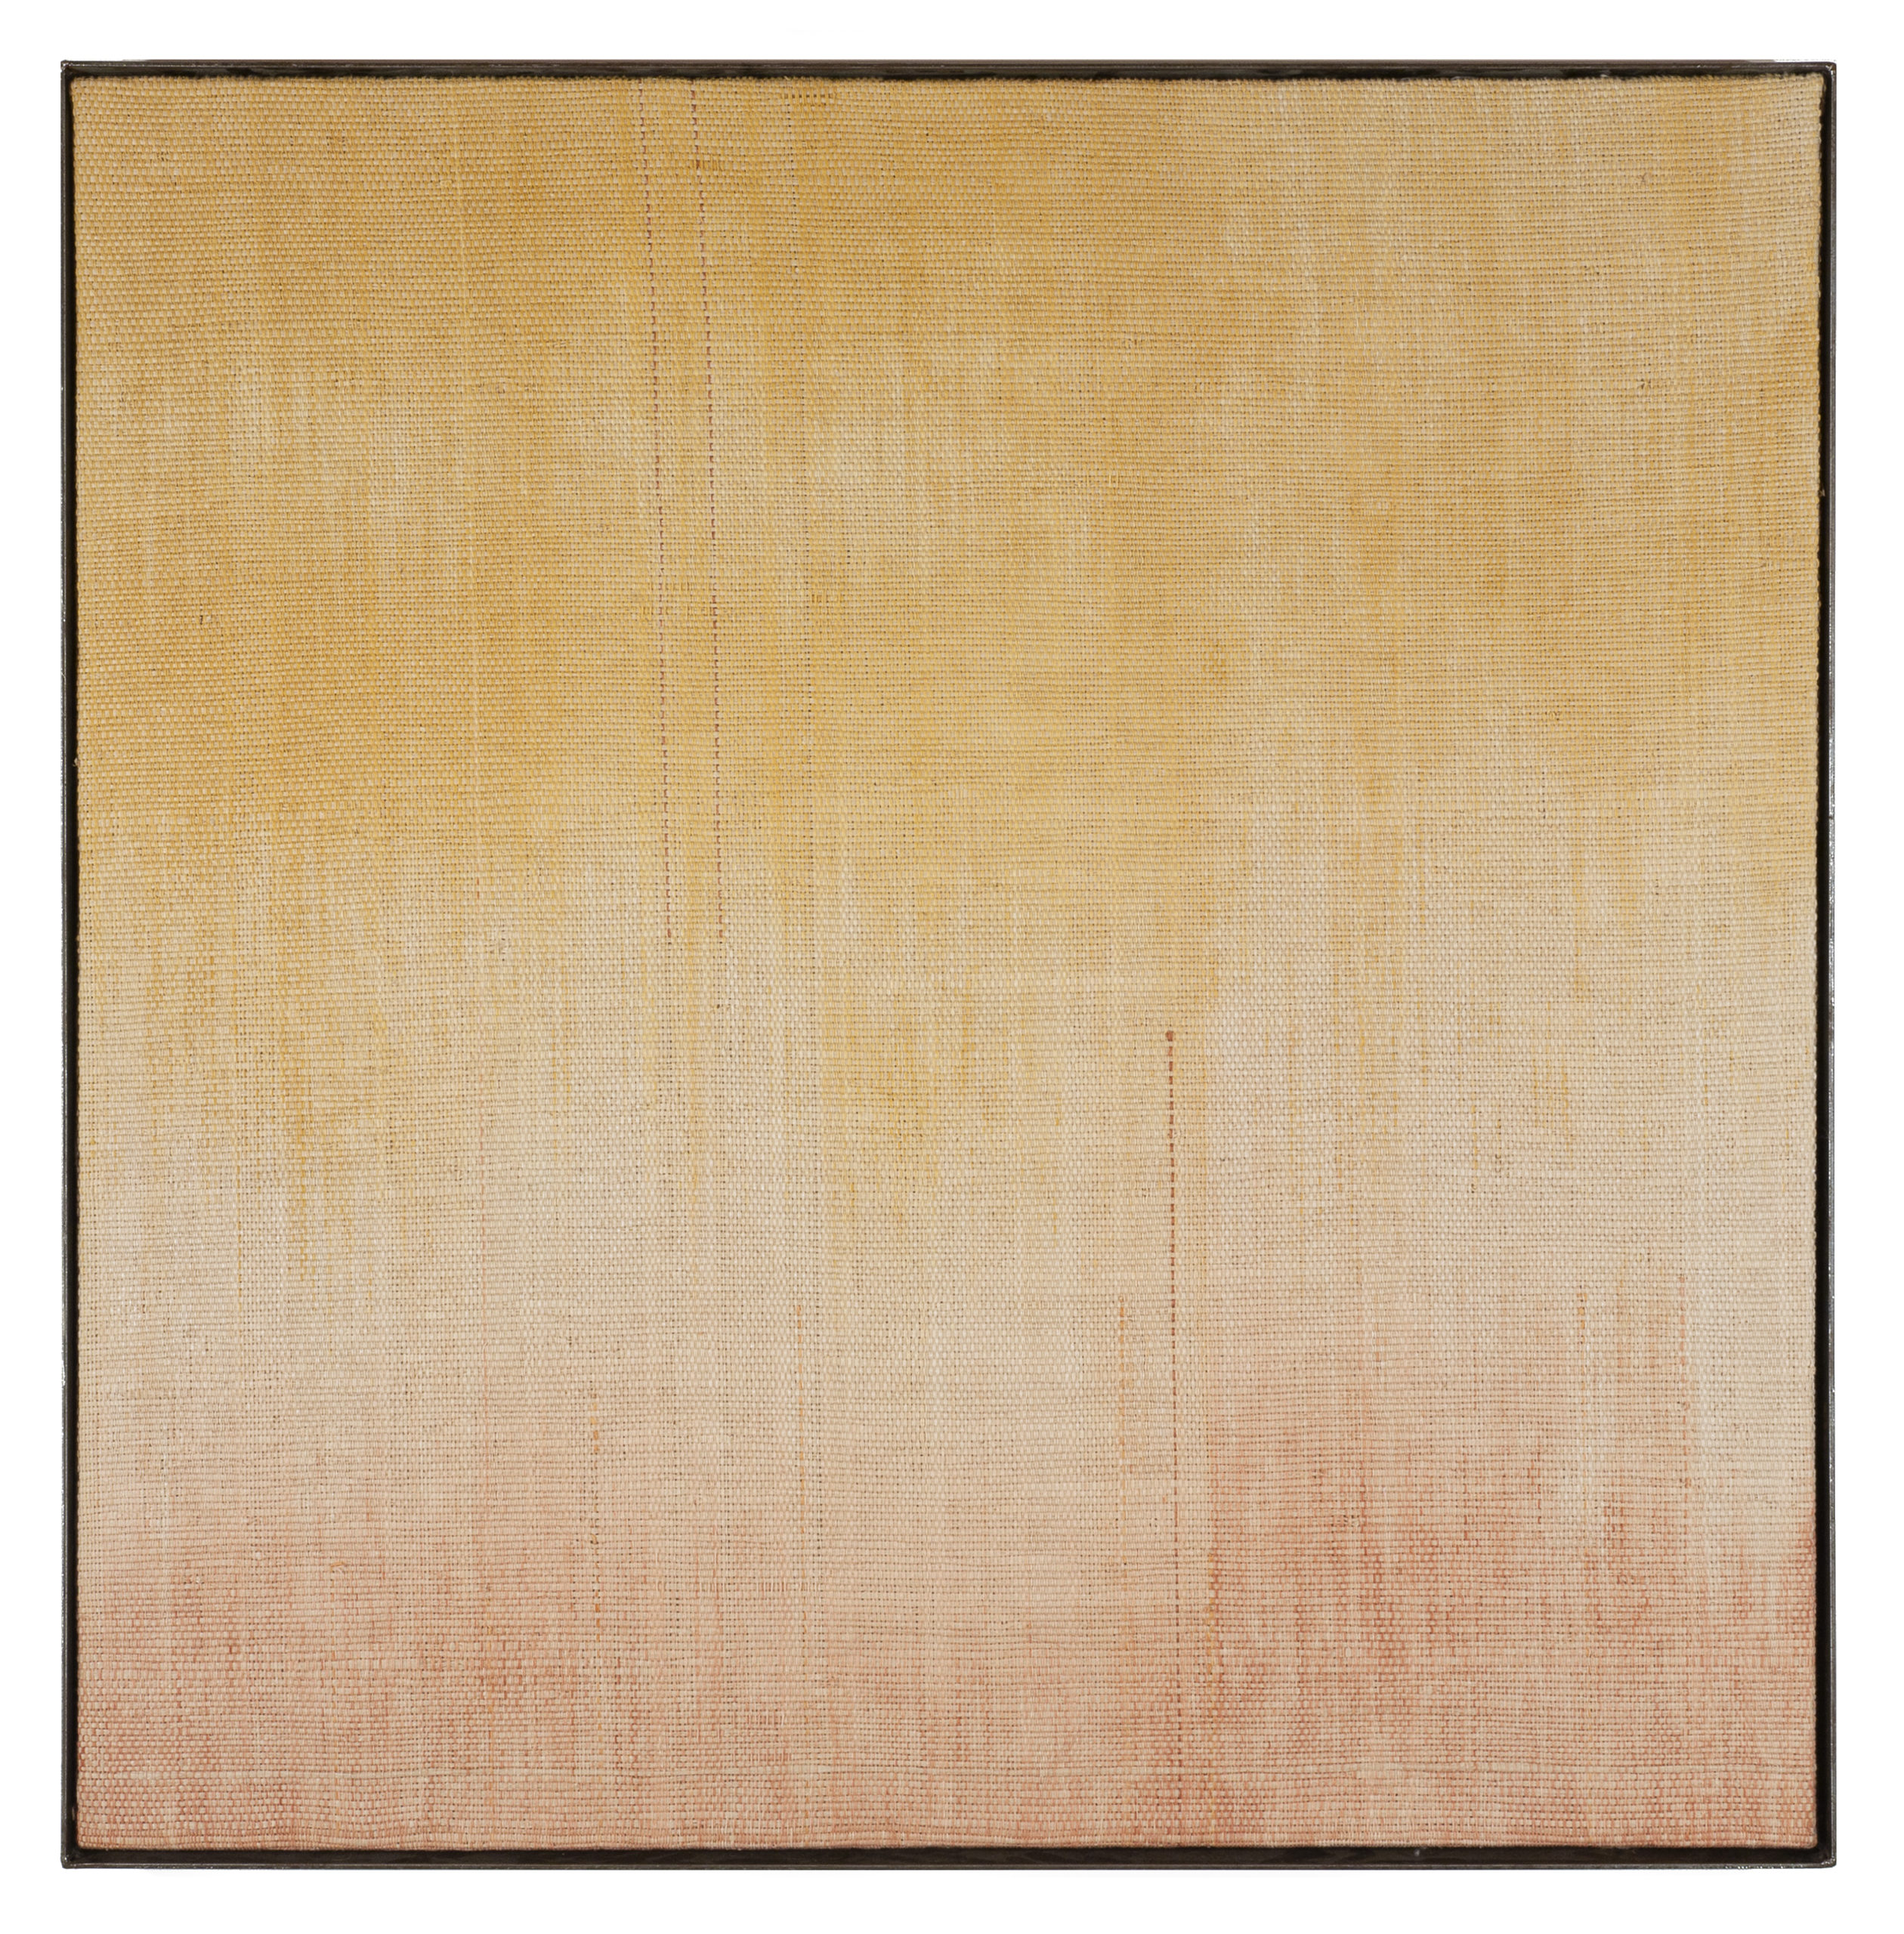 

											Will Clift and Elizabeth Hohimer</b>

											<em>
												Desert Variations</em> 

											<h4>
												Santa Fe: May 28 - August 20, 2022											</h4>

		                																																Elizabeth Hohimer,  
																																								<i>Just a Little Bit Longer Where It's Warm,</i>  
																																								2021, 
																																								West Texas cotton dyed with collected clay, pine paper, and silk tapestry in steel frame., 
																																								37 x 36 3/4 x 2 1/2 inches 
																								
		                				